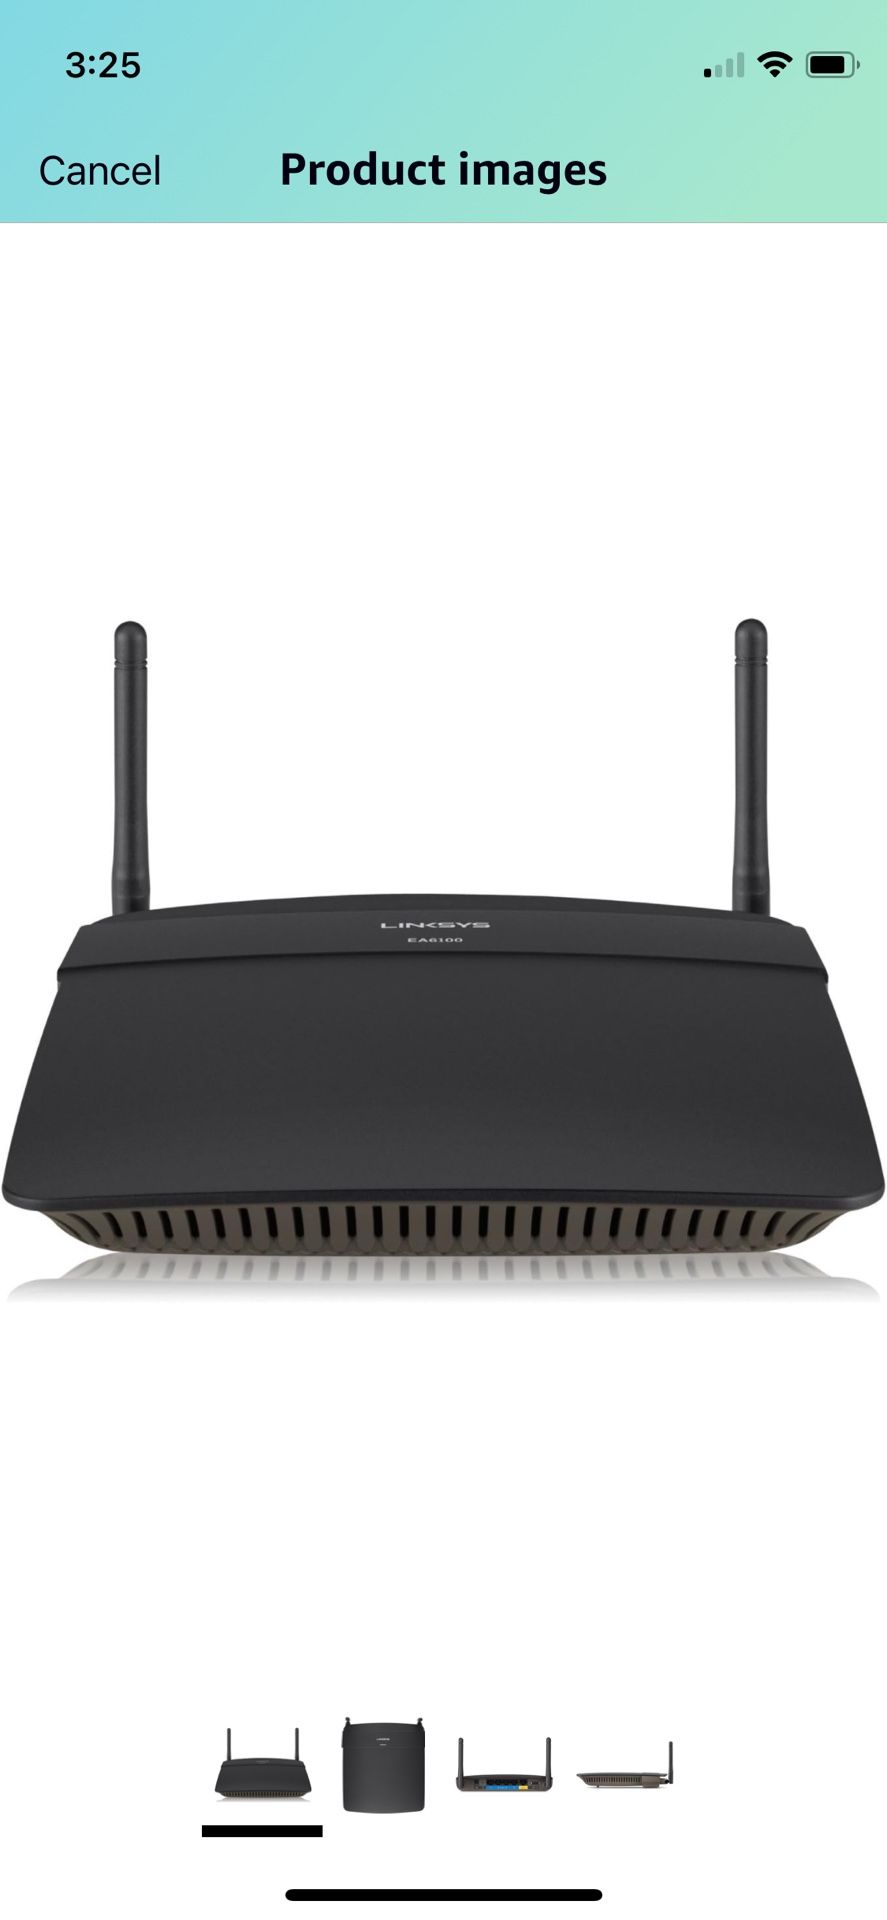 New And Sealed-Linksys AC1200 Wi-Fi Wireless Dual-Band+ Router, Smart Wi-Fi App Enabled to Control Your Network from Anywhere (EA6100)